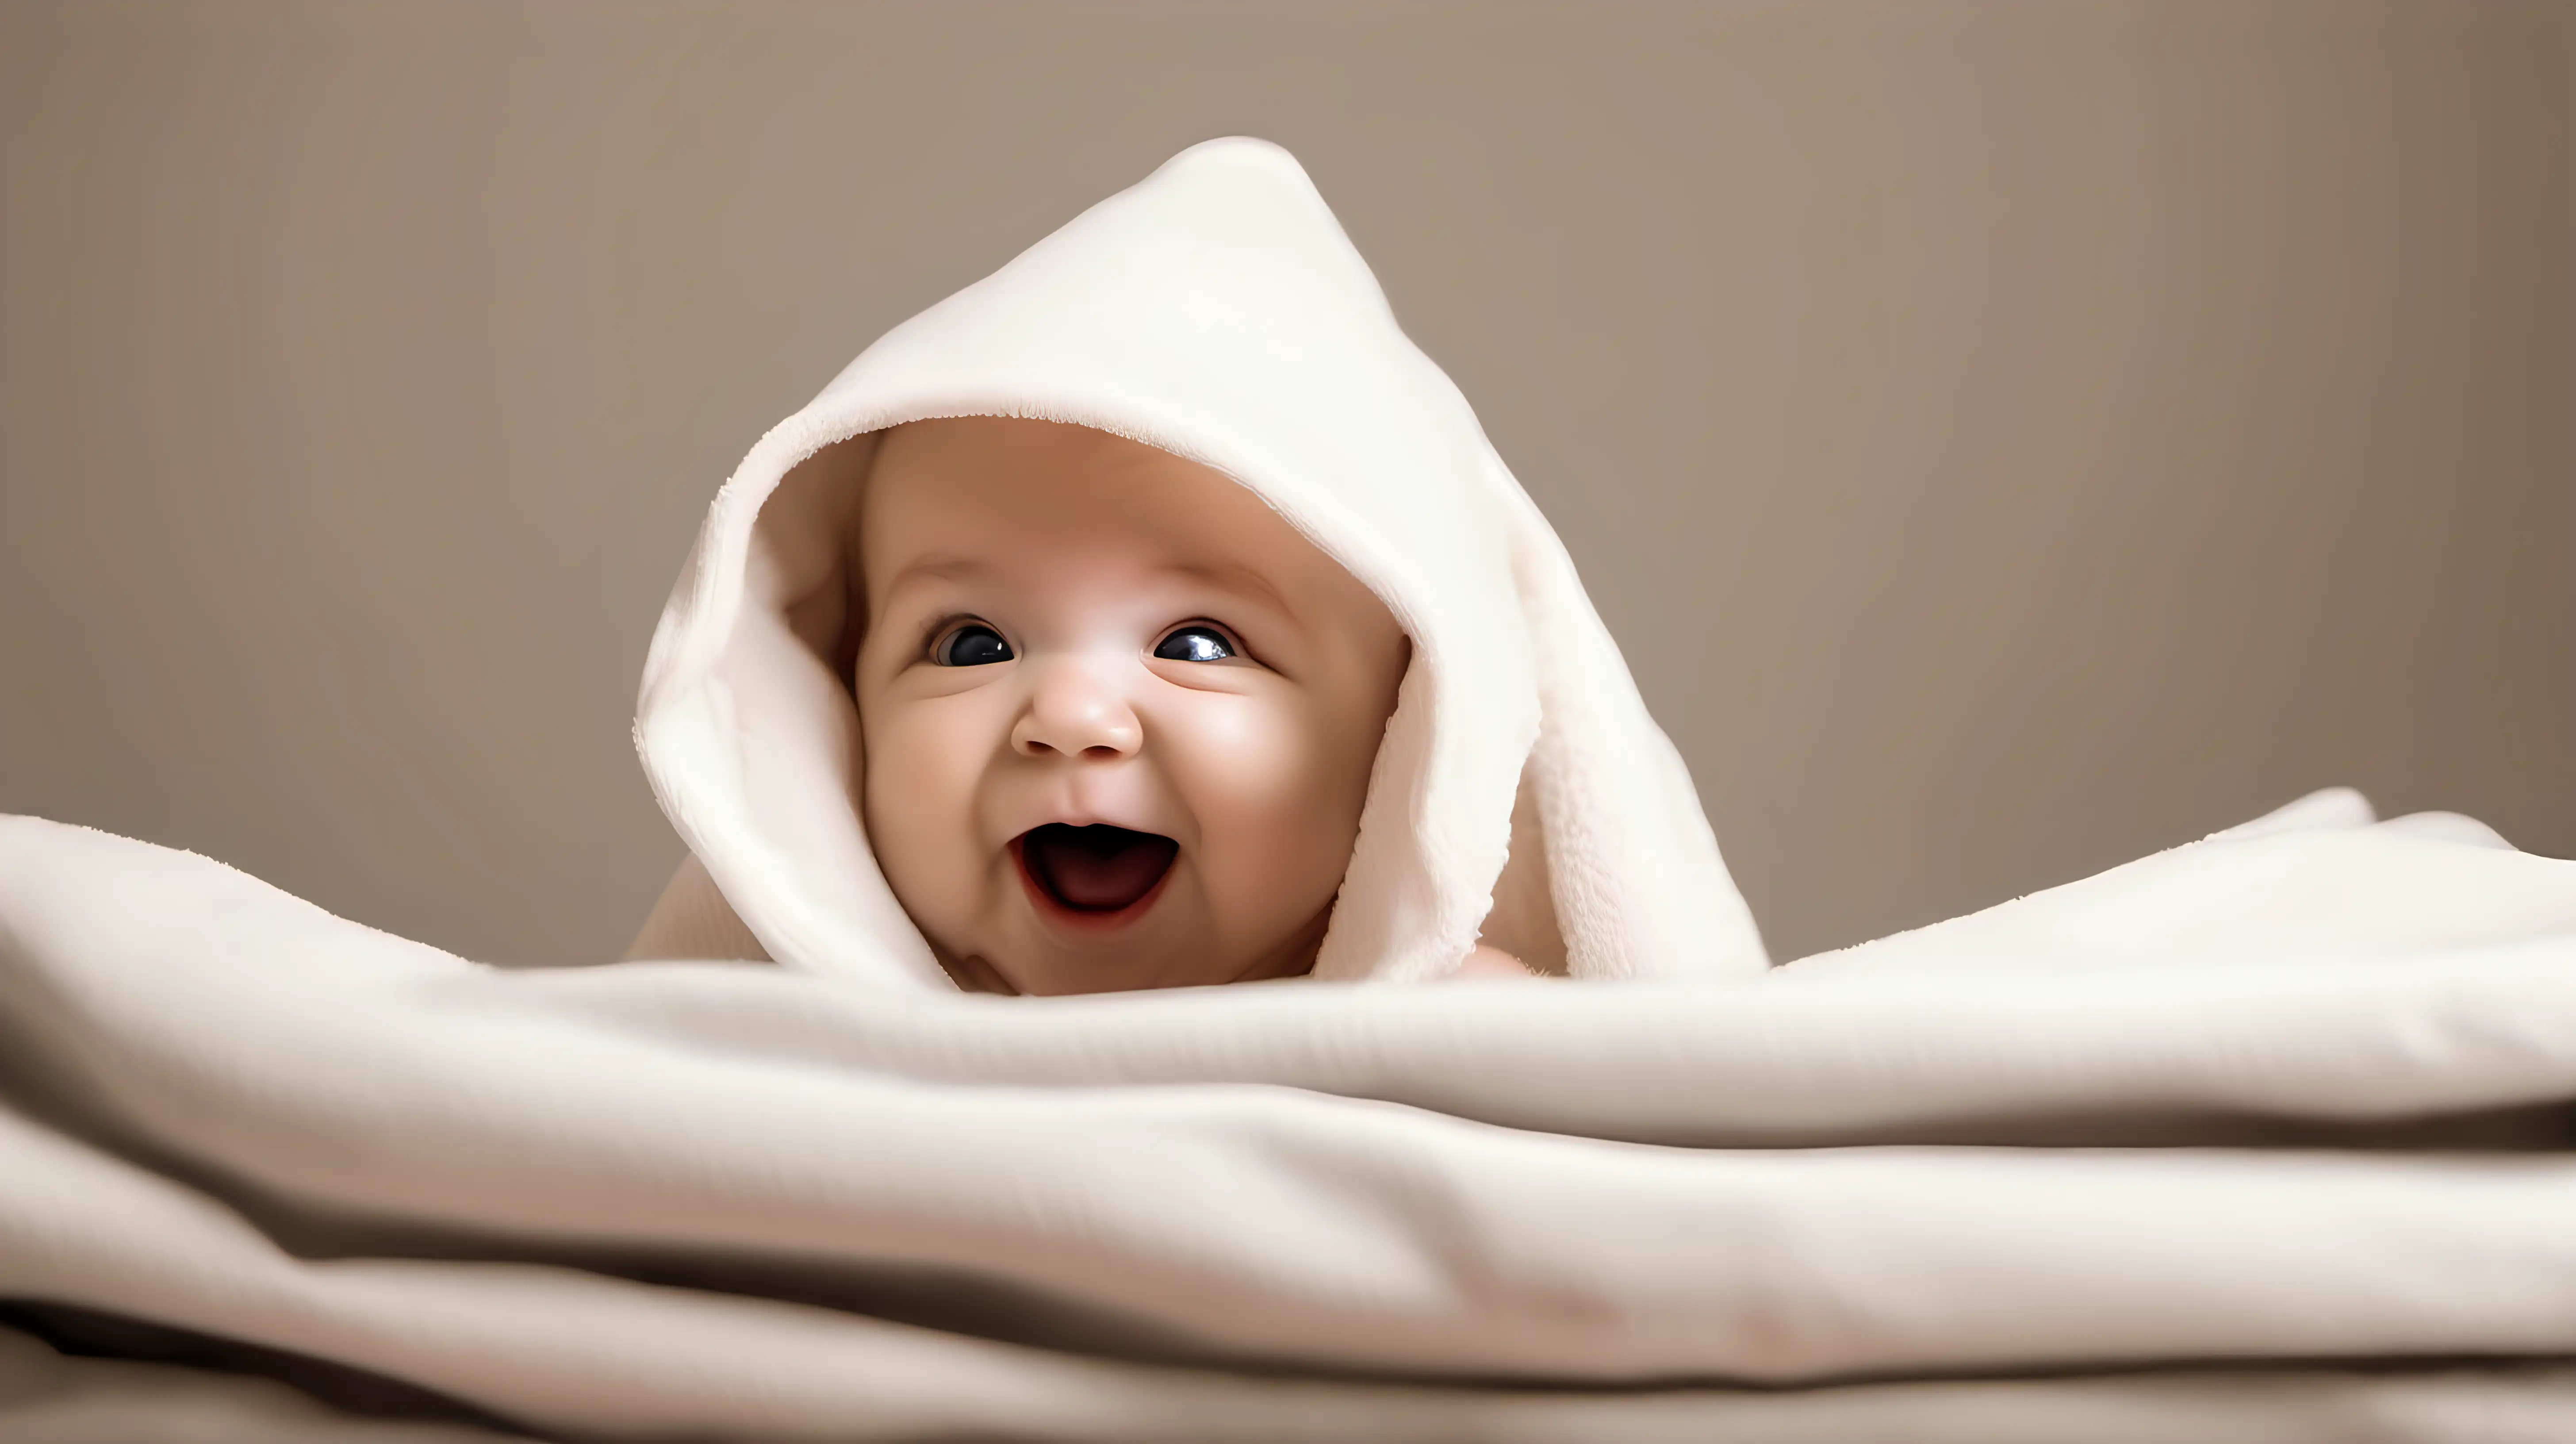 A heartwarming photo of a baby playing peek-a-boo with a soft blanket, their eyes shining with laughter and delight as they engage in the playful game against a simple, neutral backdrop.